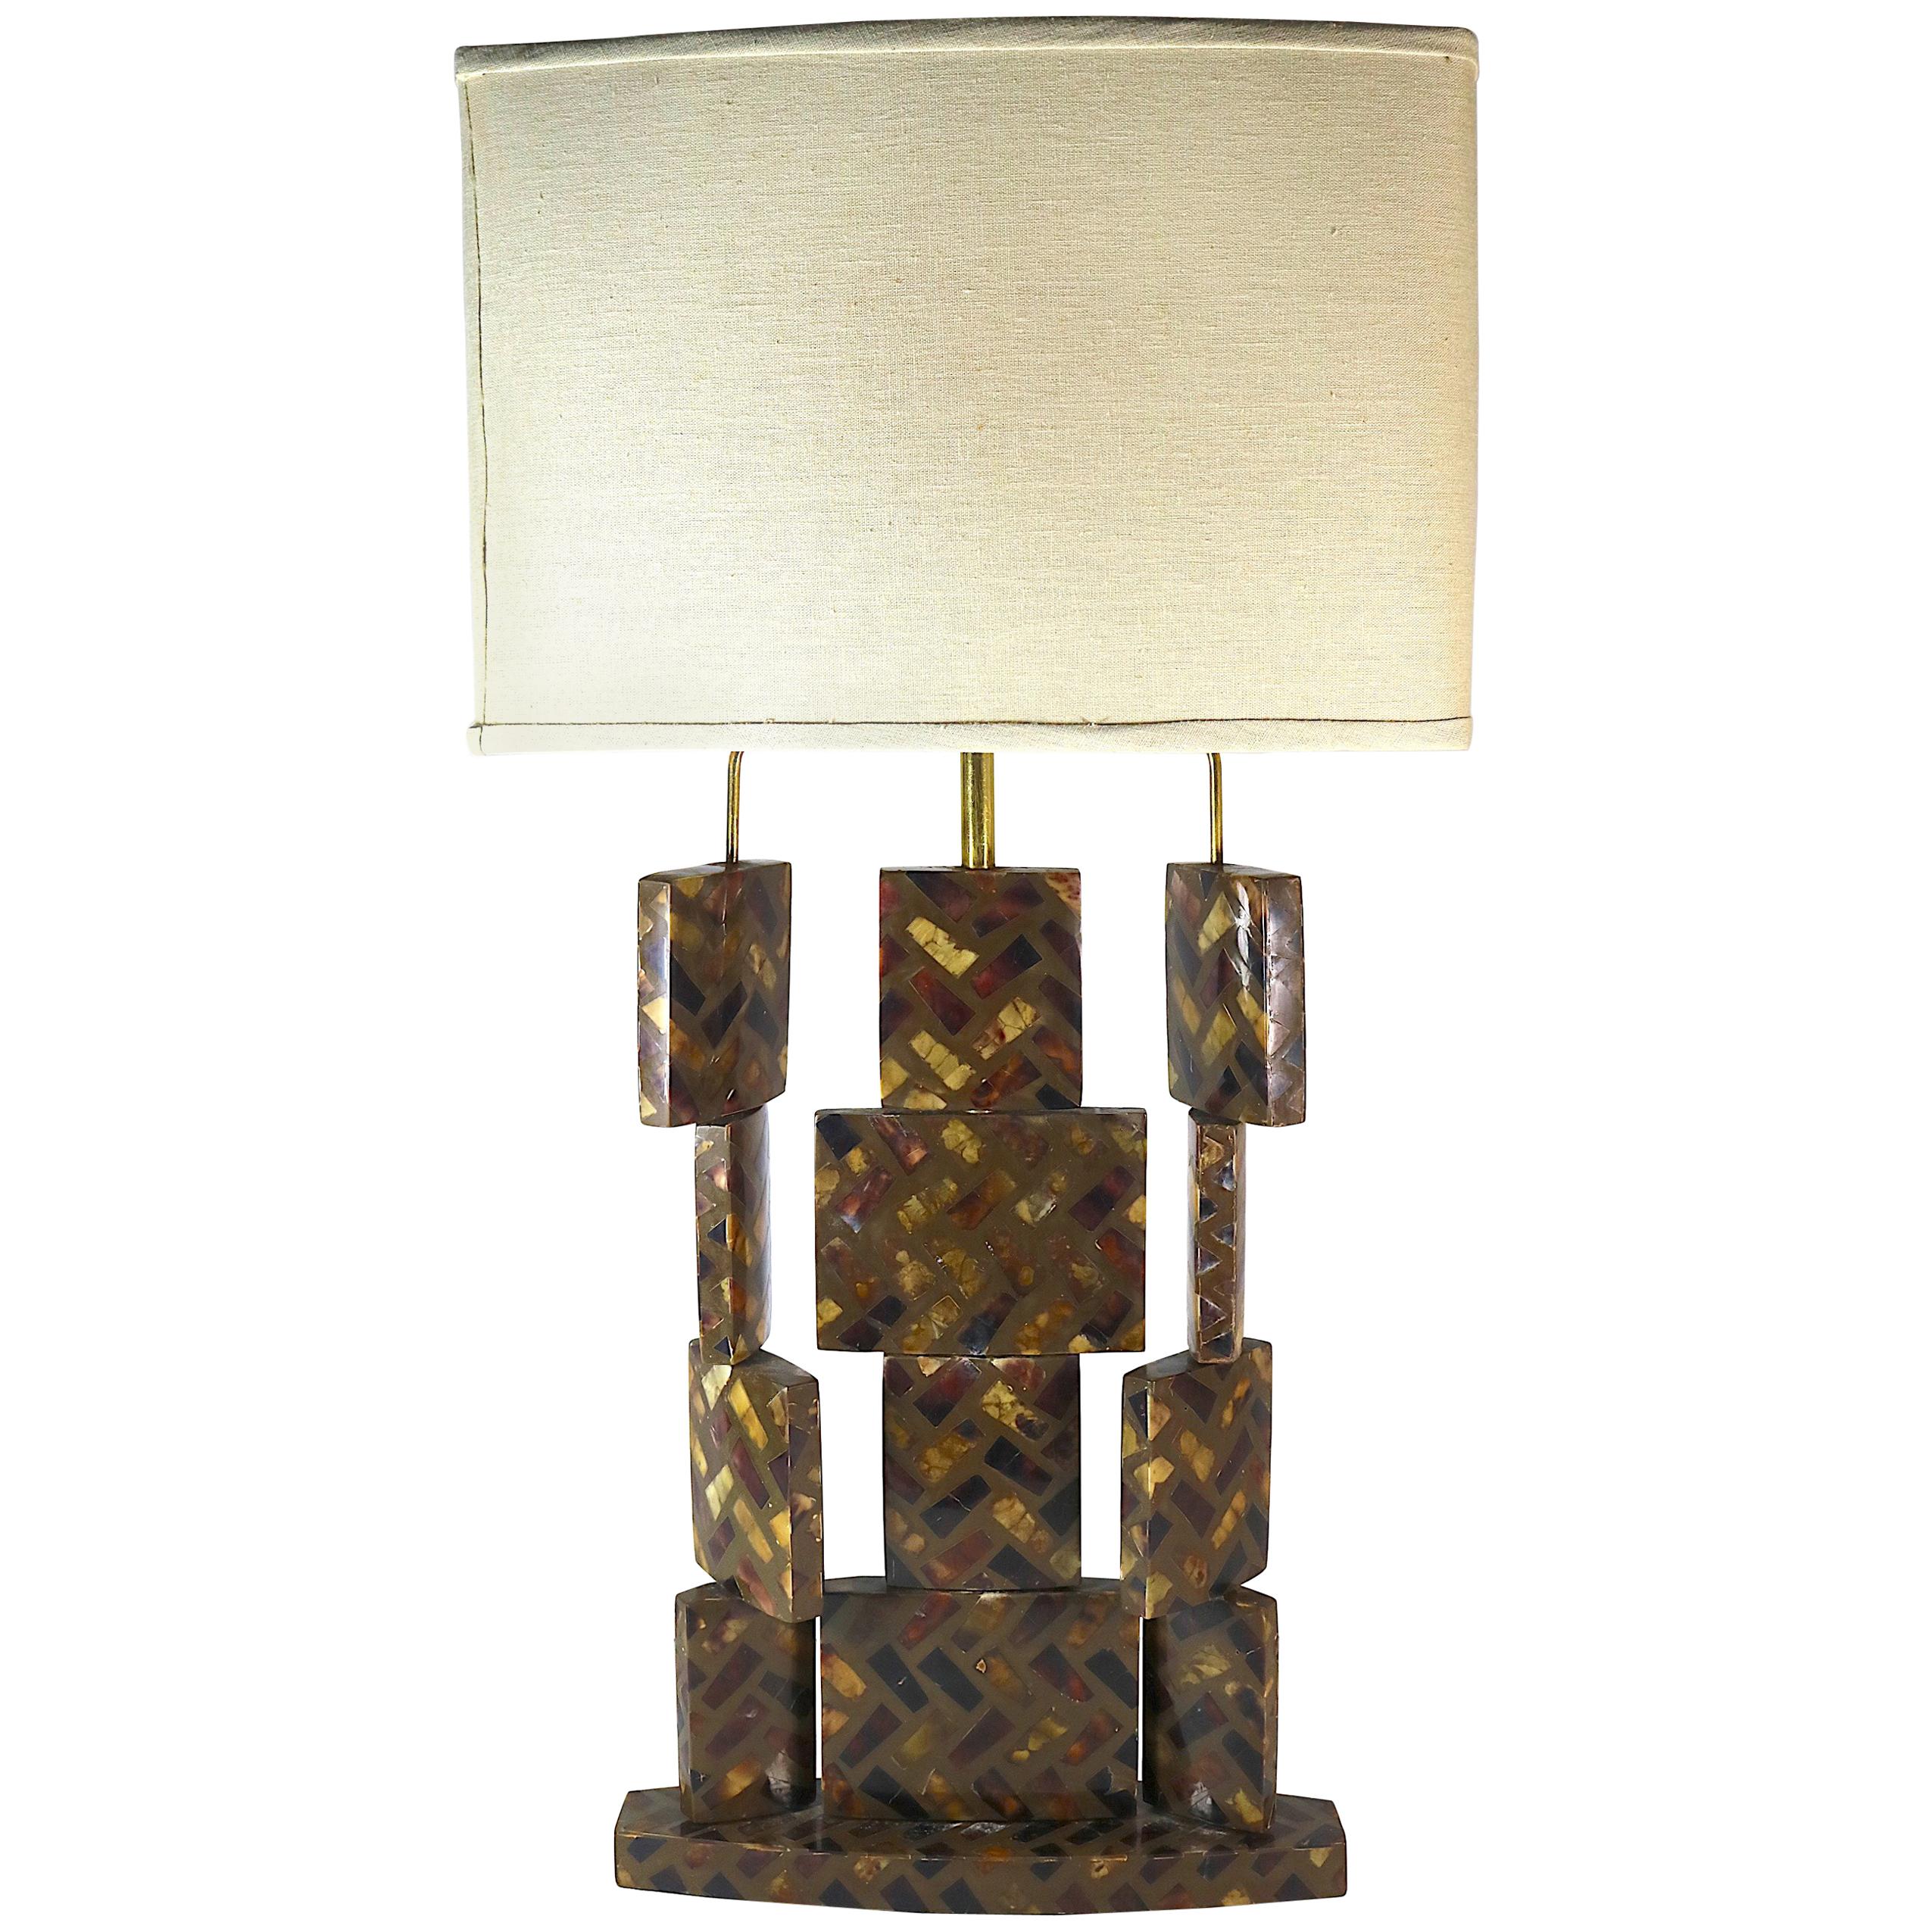 A rare stylish modern rare R & Y Augousti Paris authentic Tesellated Horn table lamp.
The French lamp combines glamour and modernism in its form and use of exotic tessellated Horn set in lacquer and brass-
exotic materials as is a trademark of the